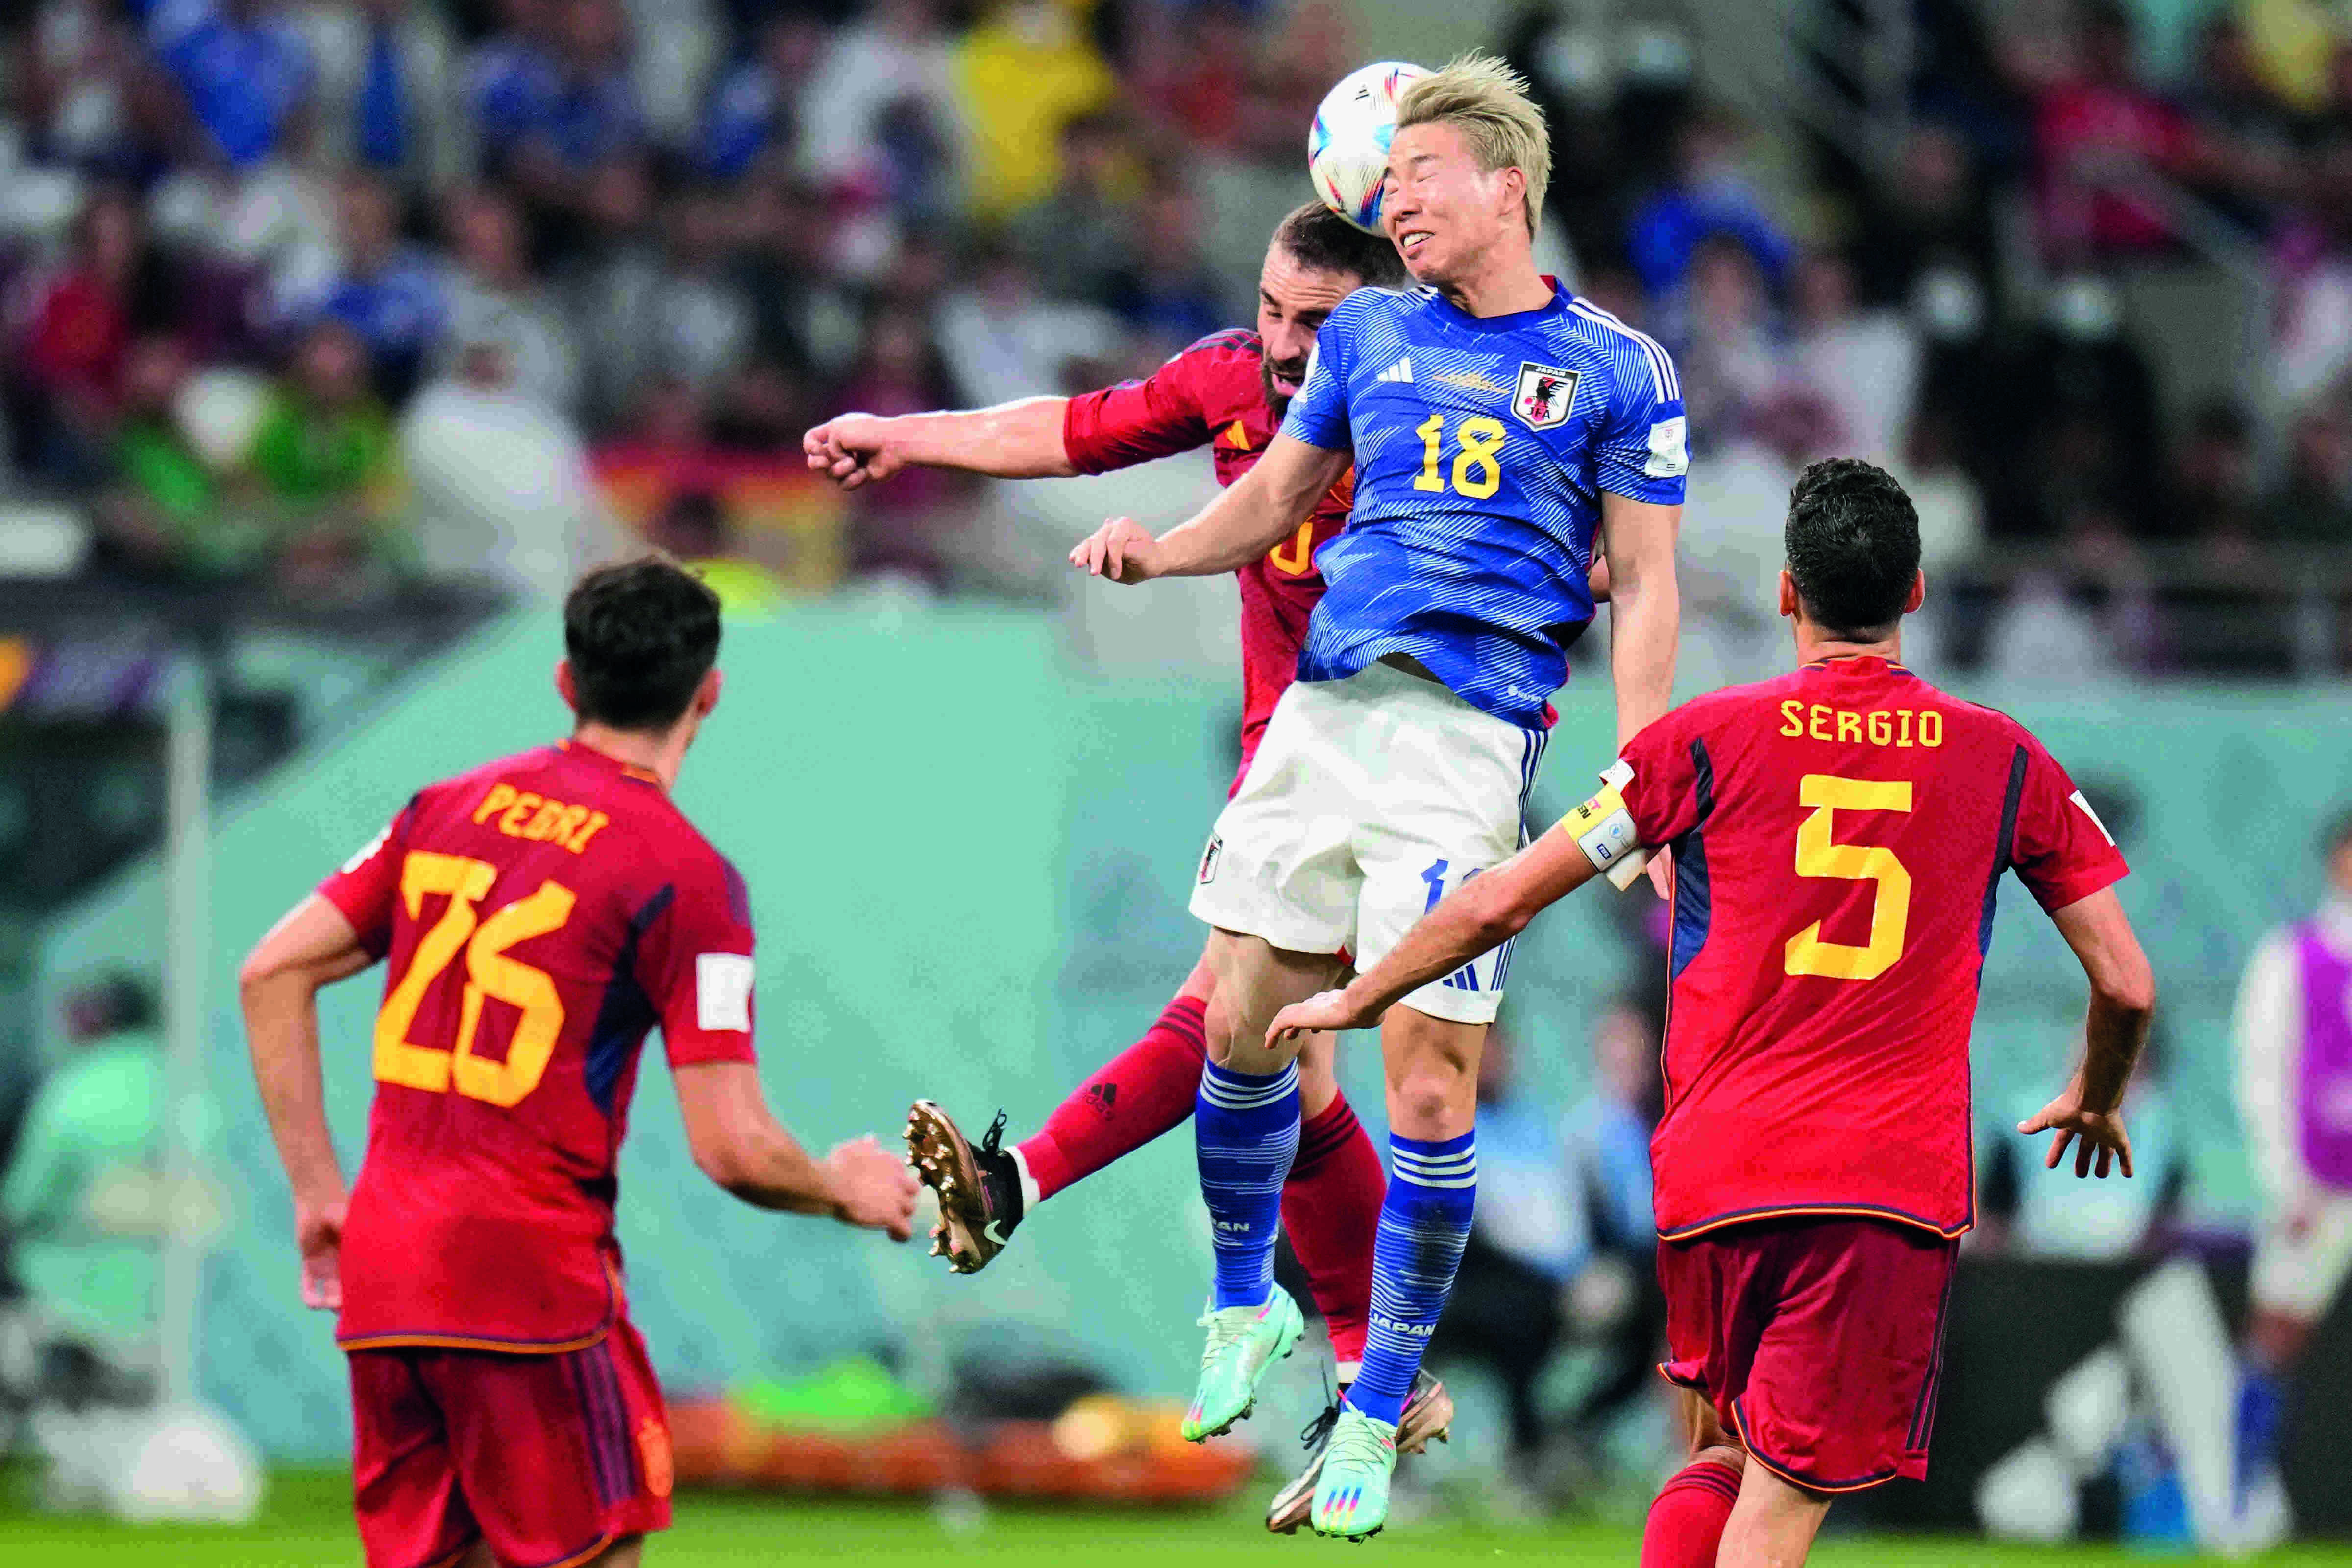 Japan beat Spain 2-1 as both teams advance to round of 16